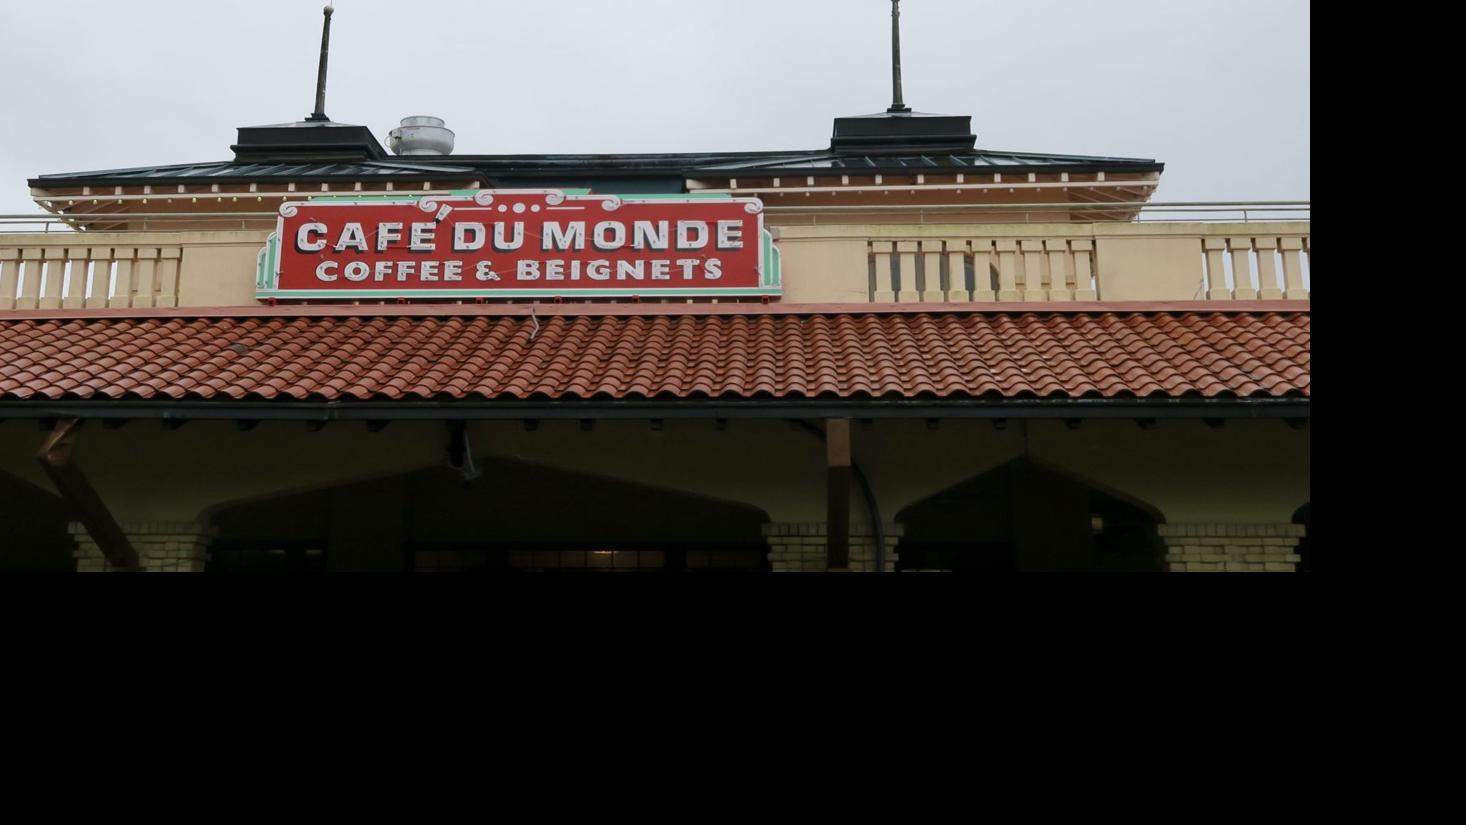 Cafe du Monde to open in City Park next week after months of